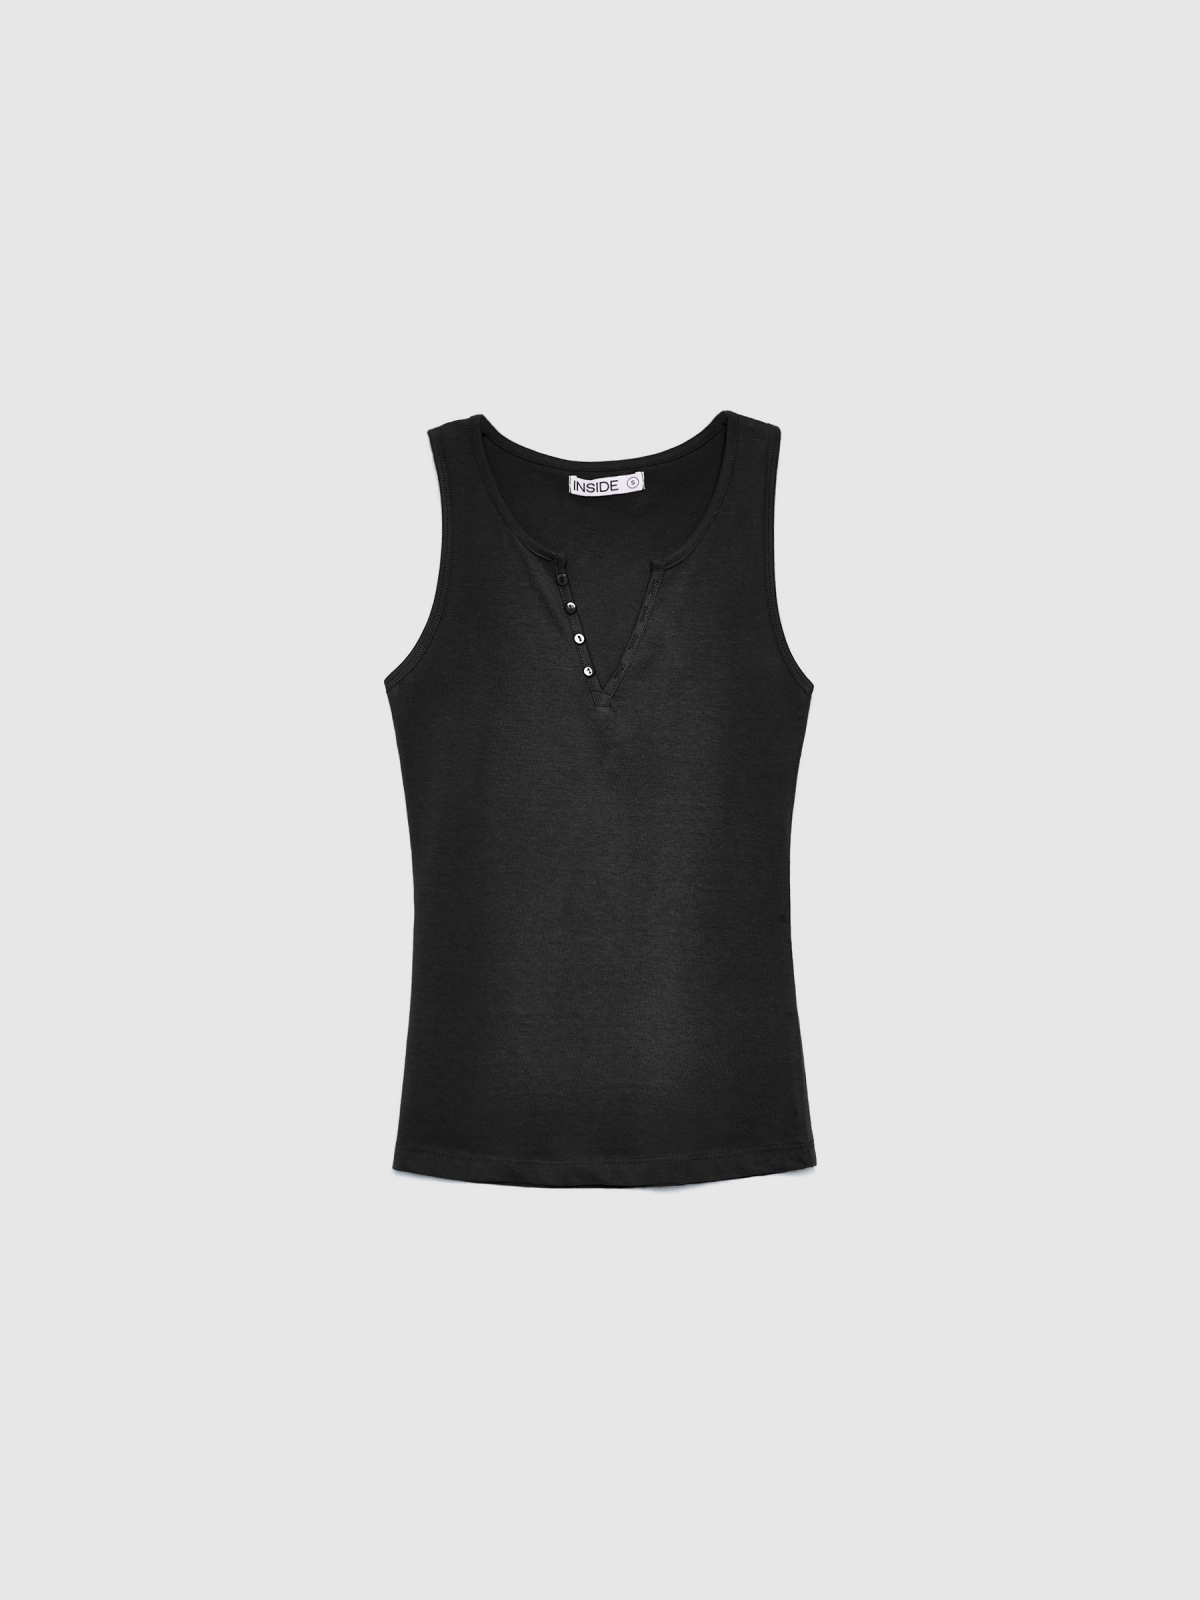  V-neck t-shirt with buttons black